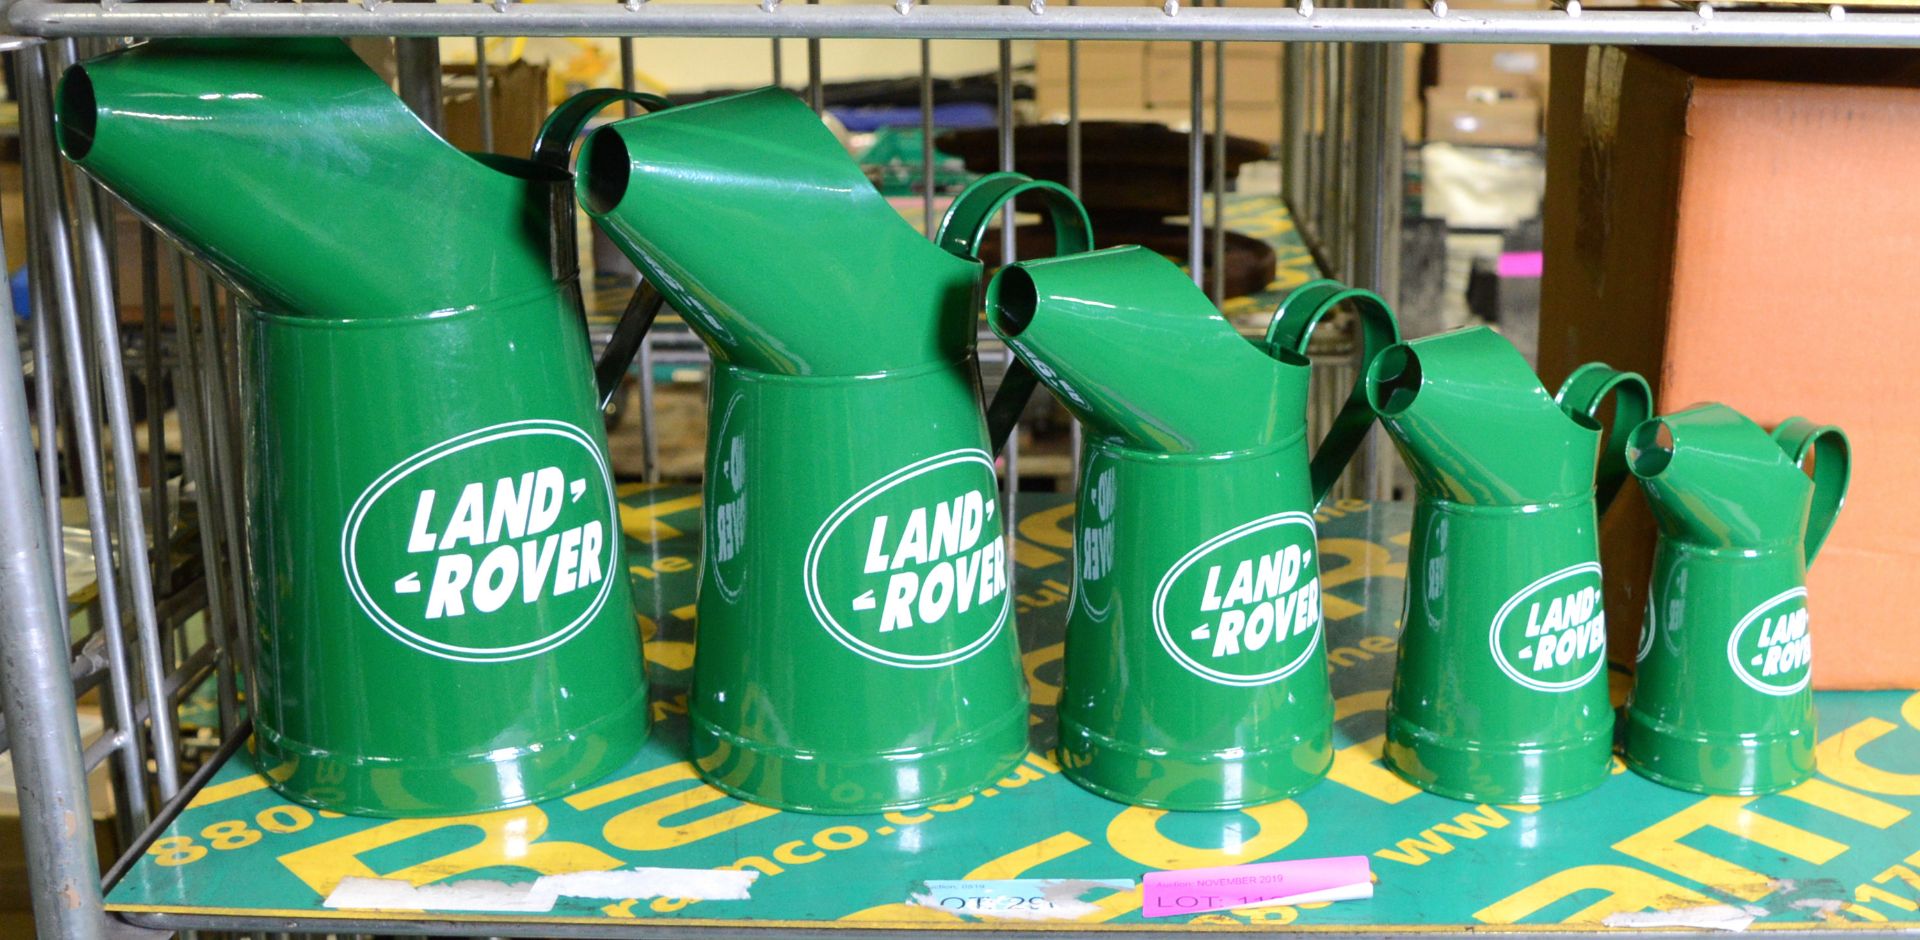 Set of Land Rover Reproduction Oil Cans.